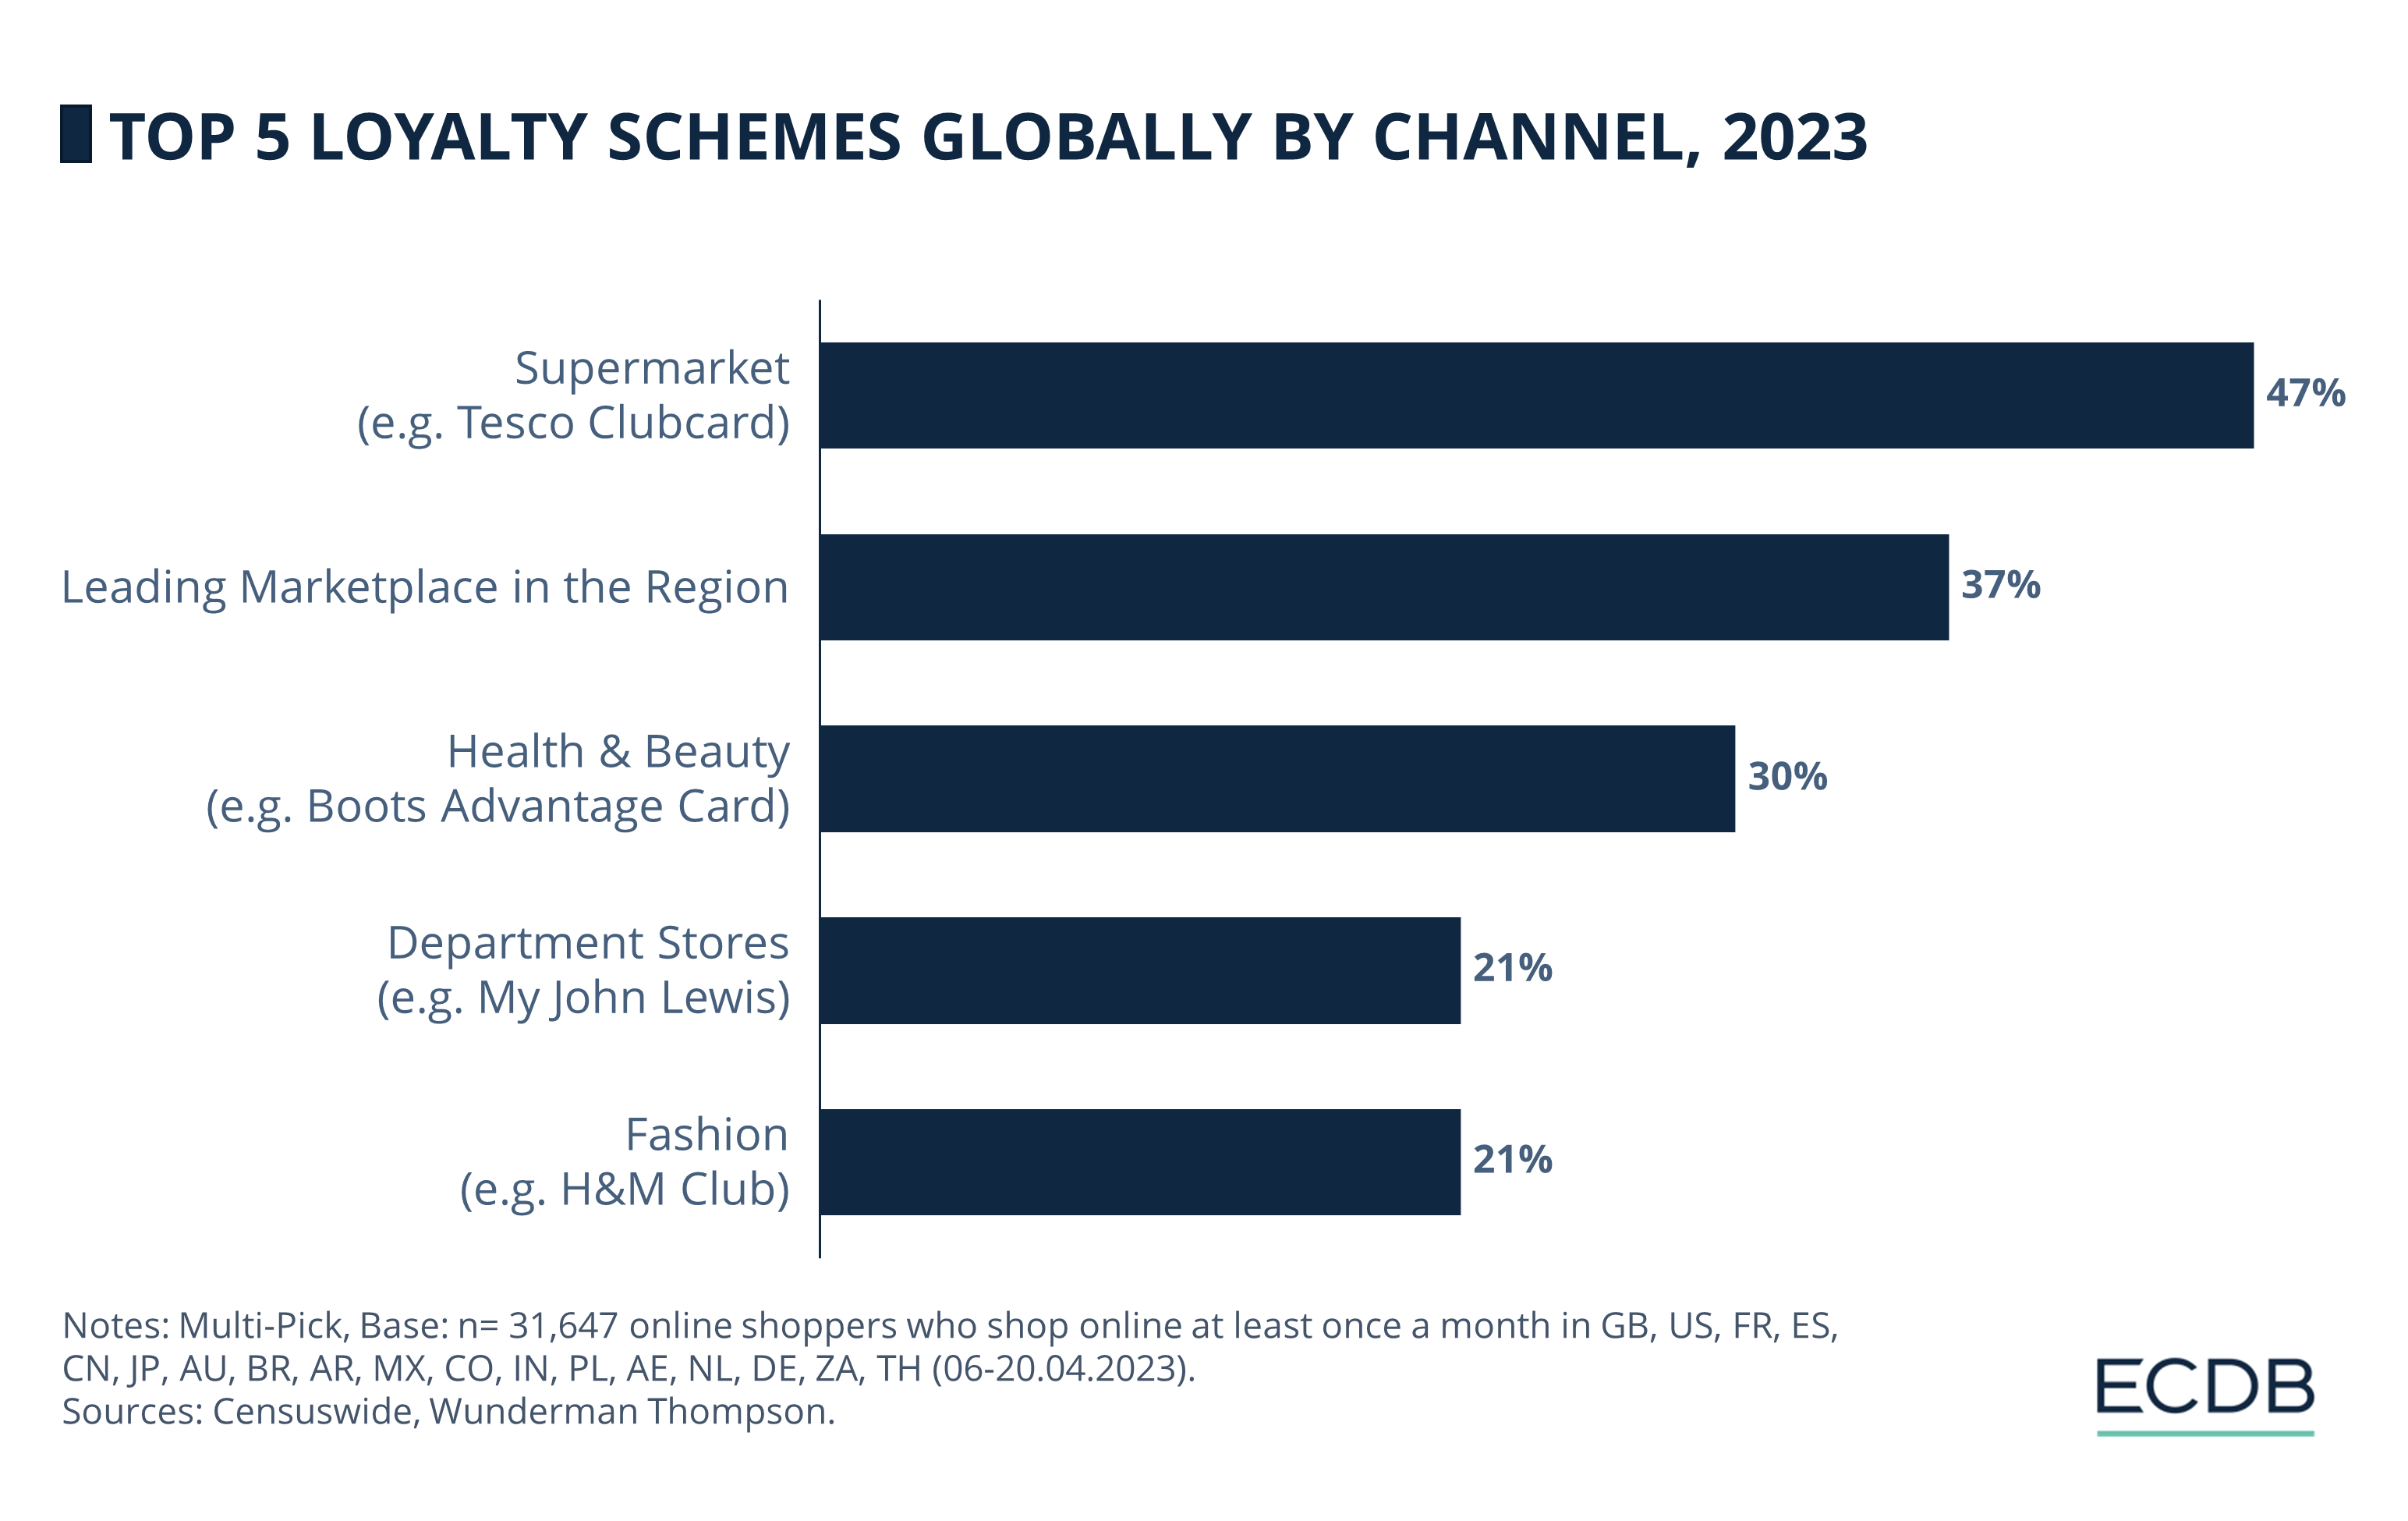 Top 5 Loyalty Schemes Globally by Channel, 2023